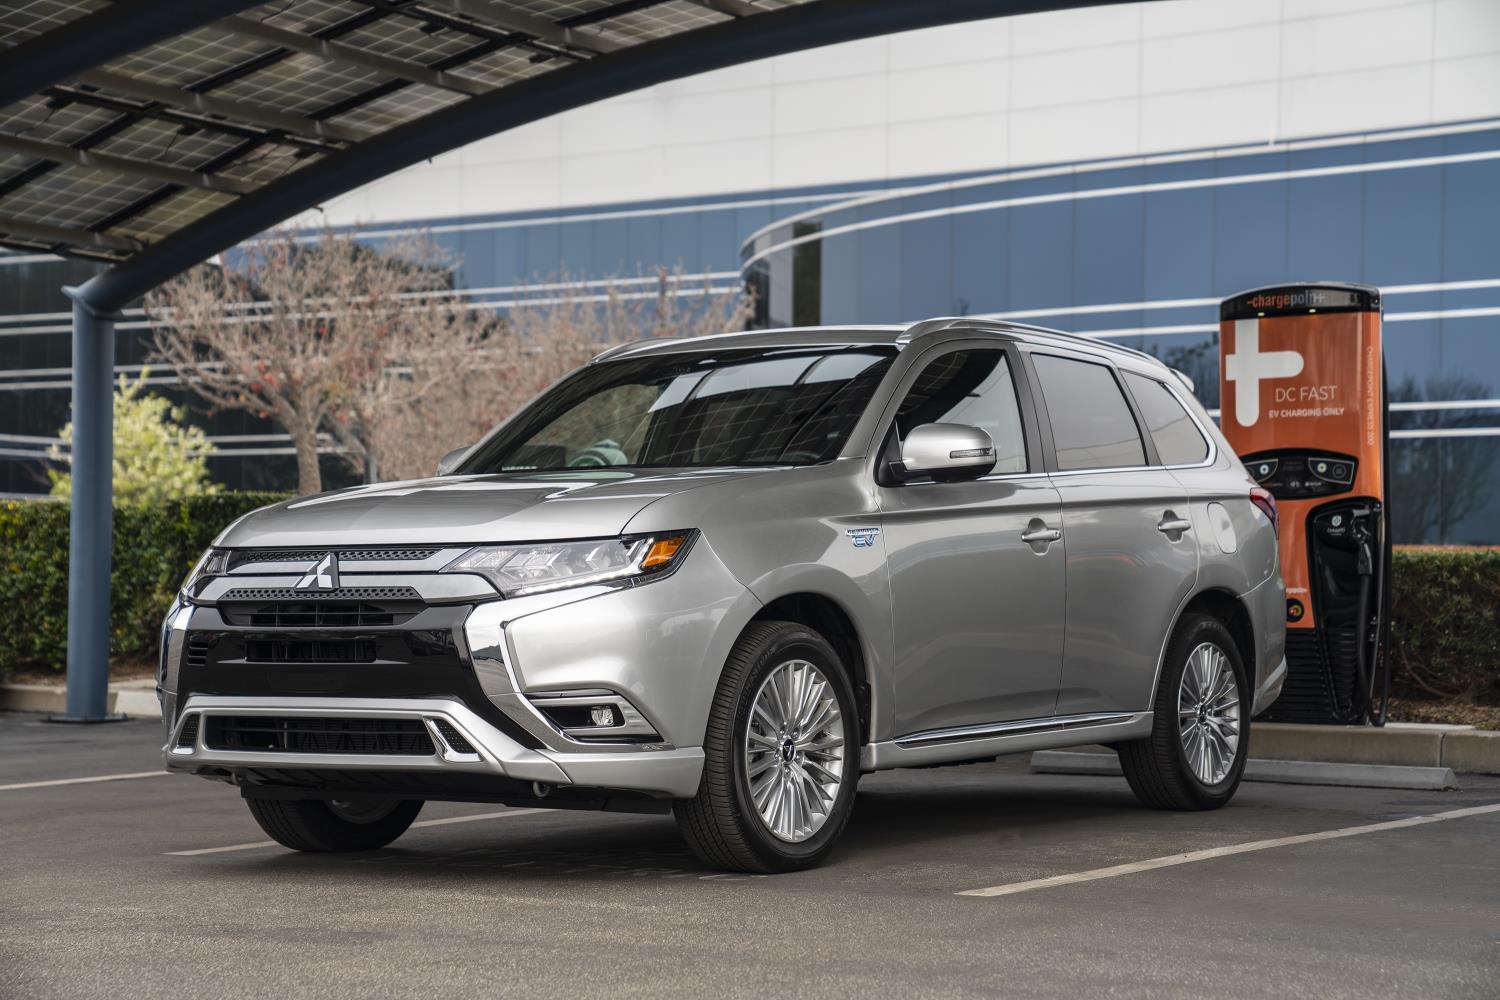 2020 mitsubishi outlander phev receives top safety rating from the nhtsa